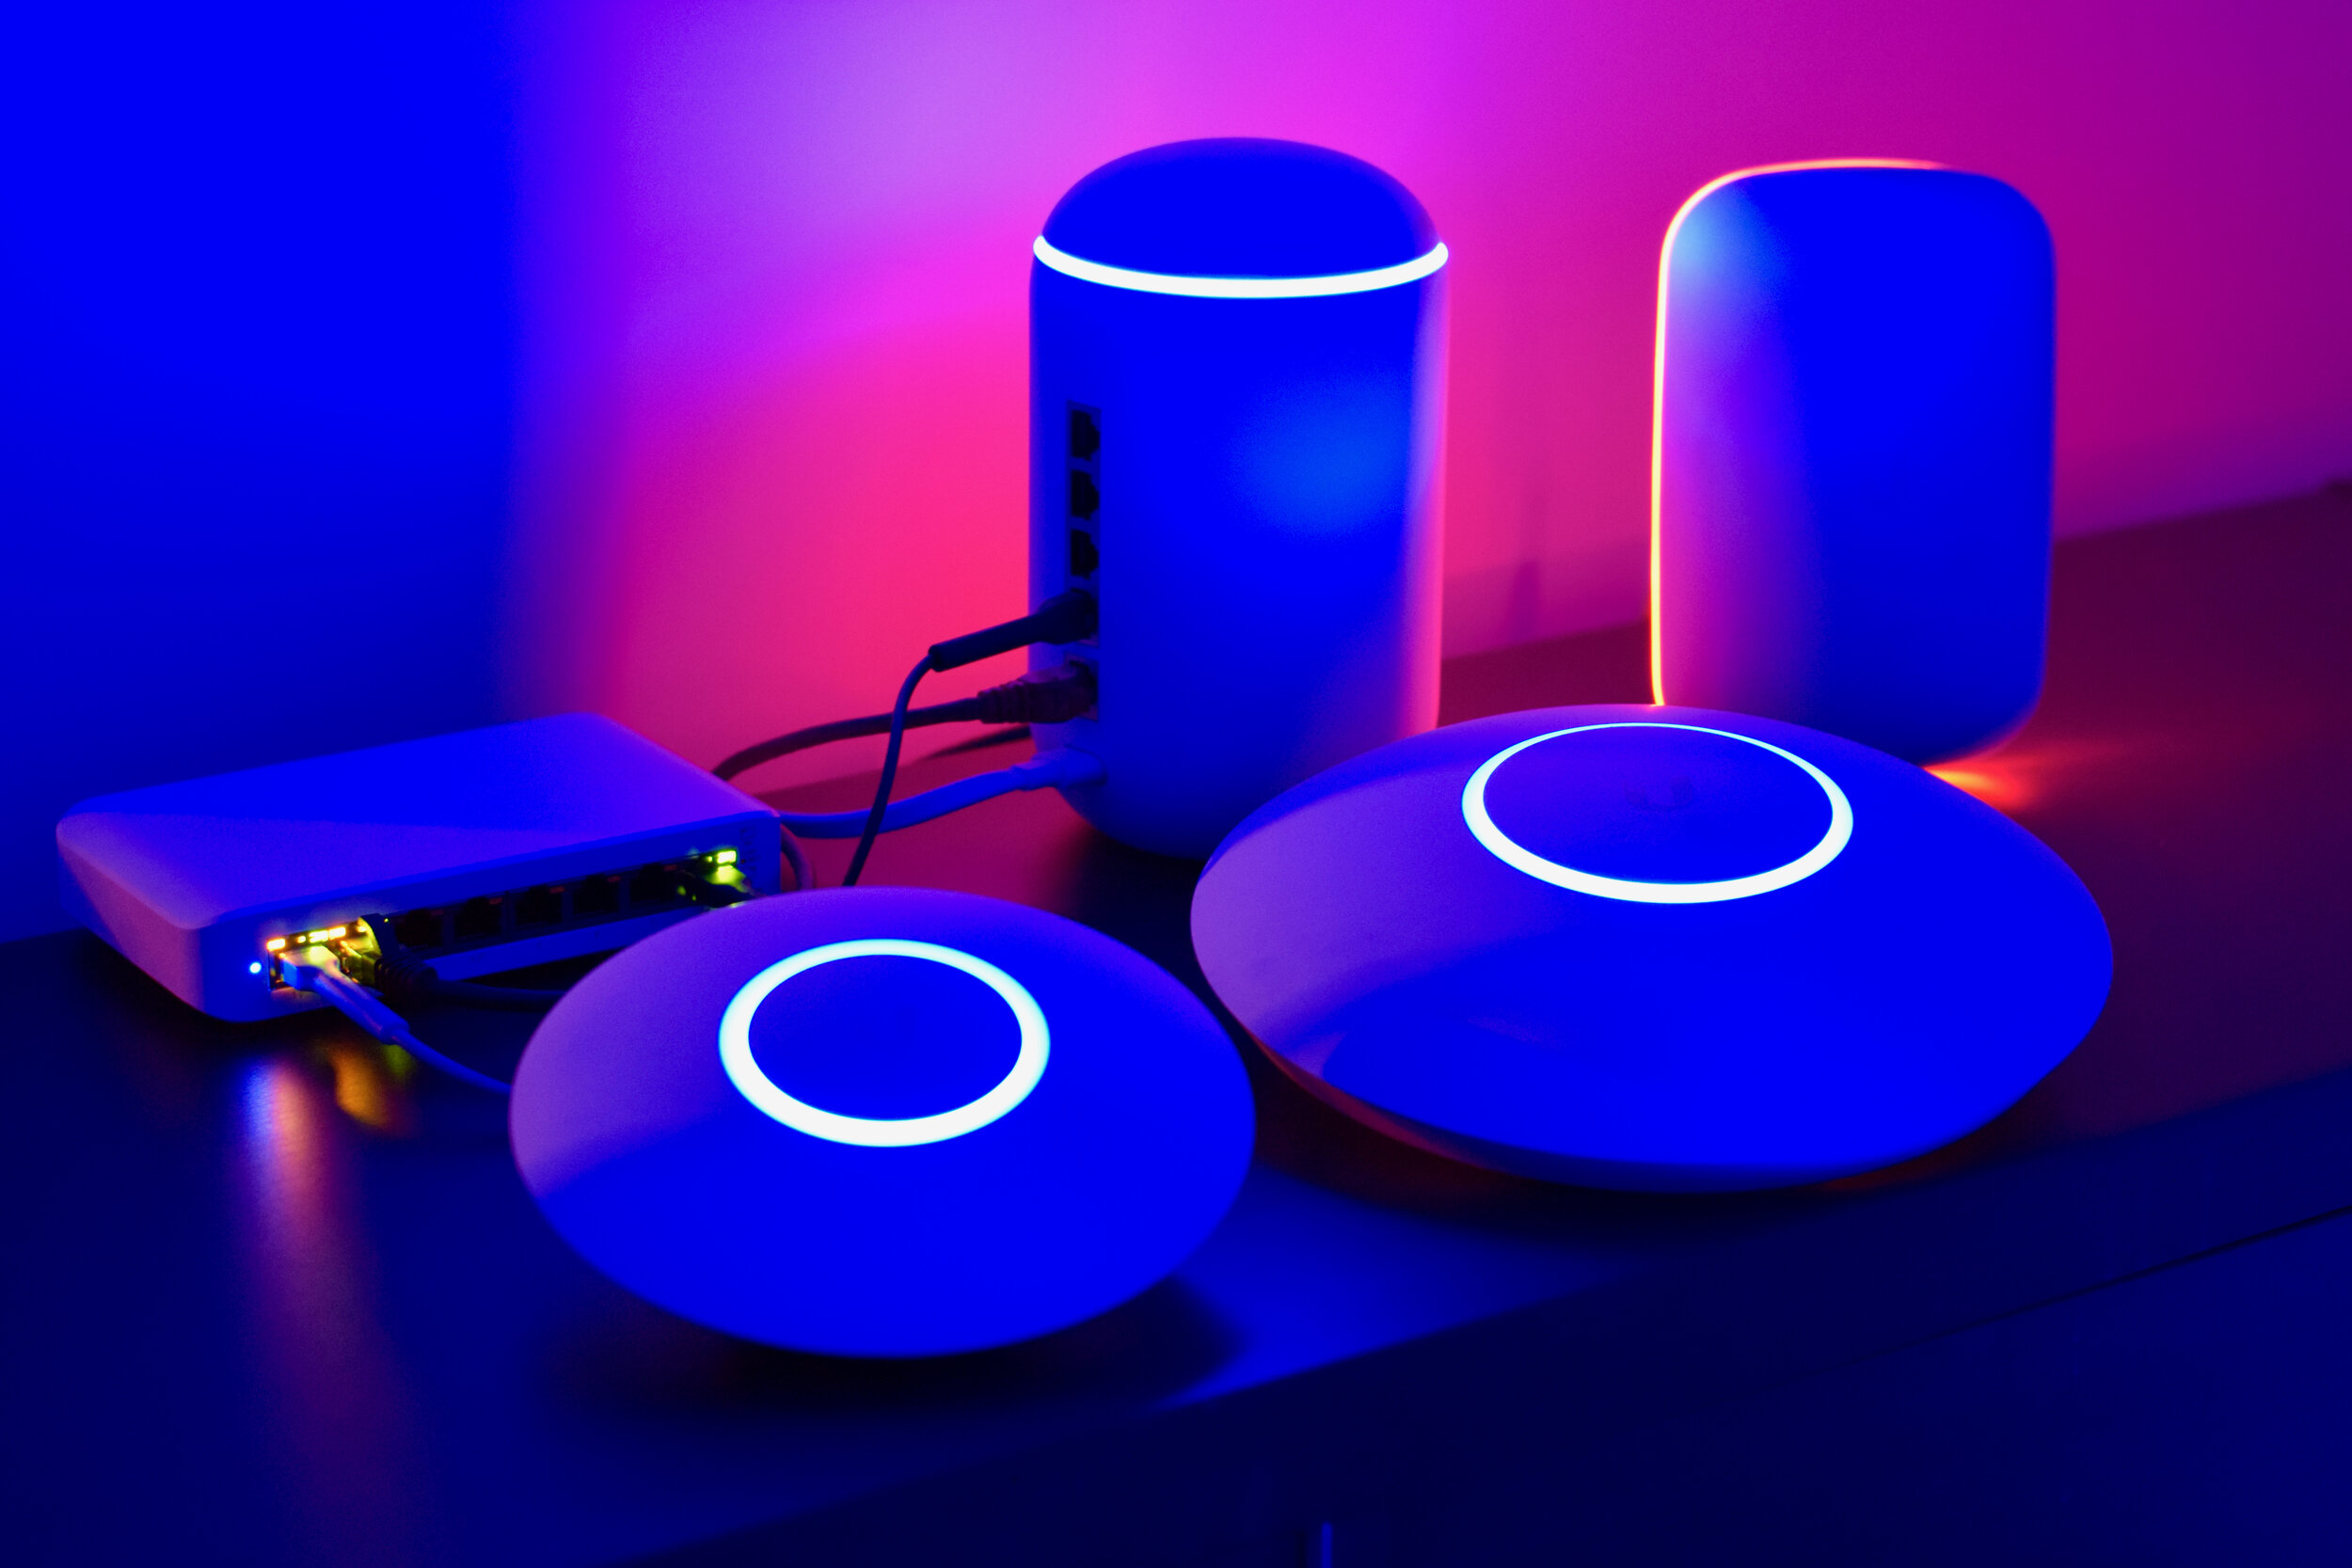 UniFi Express: A Beginner's Guide to UniFi Network 